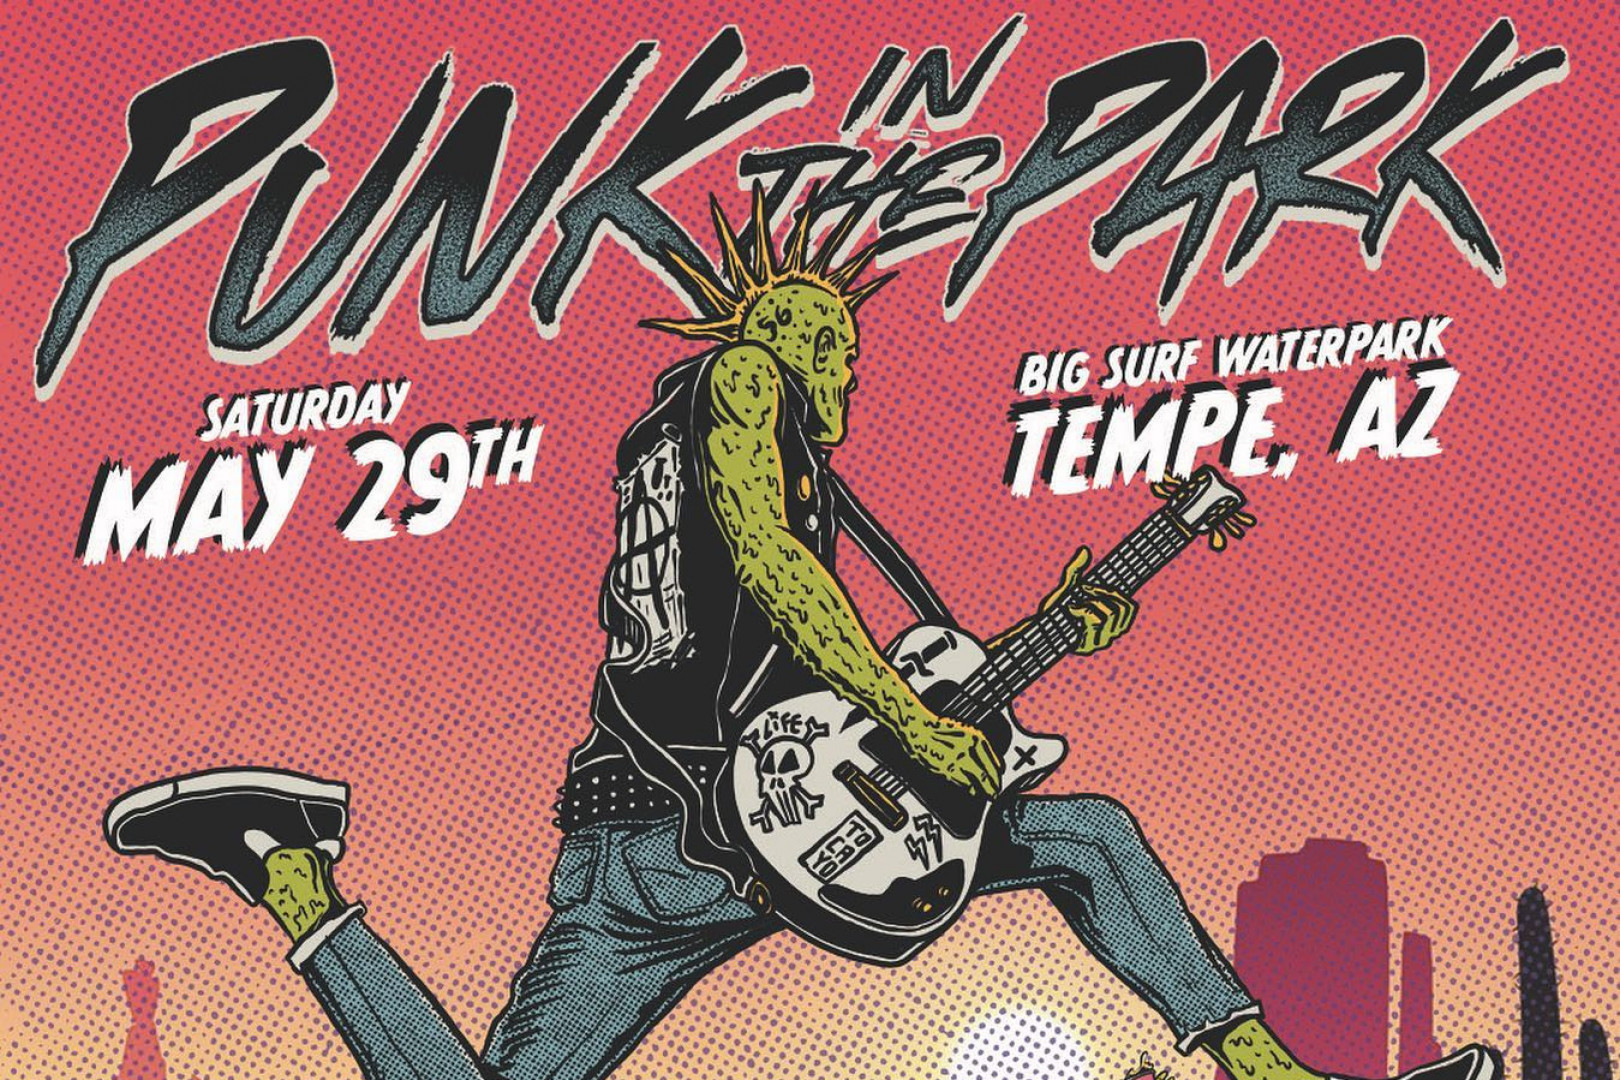 Punk In The Park announce Arizona date and location